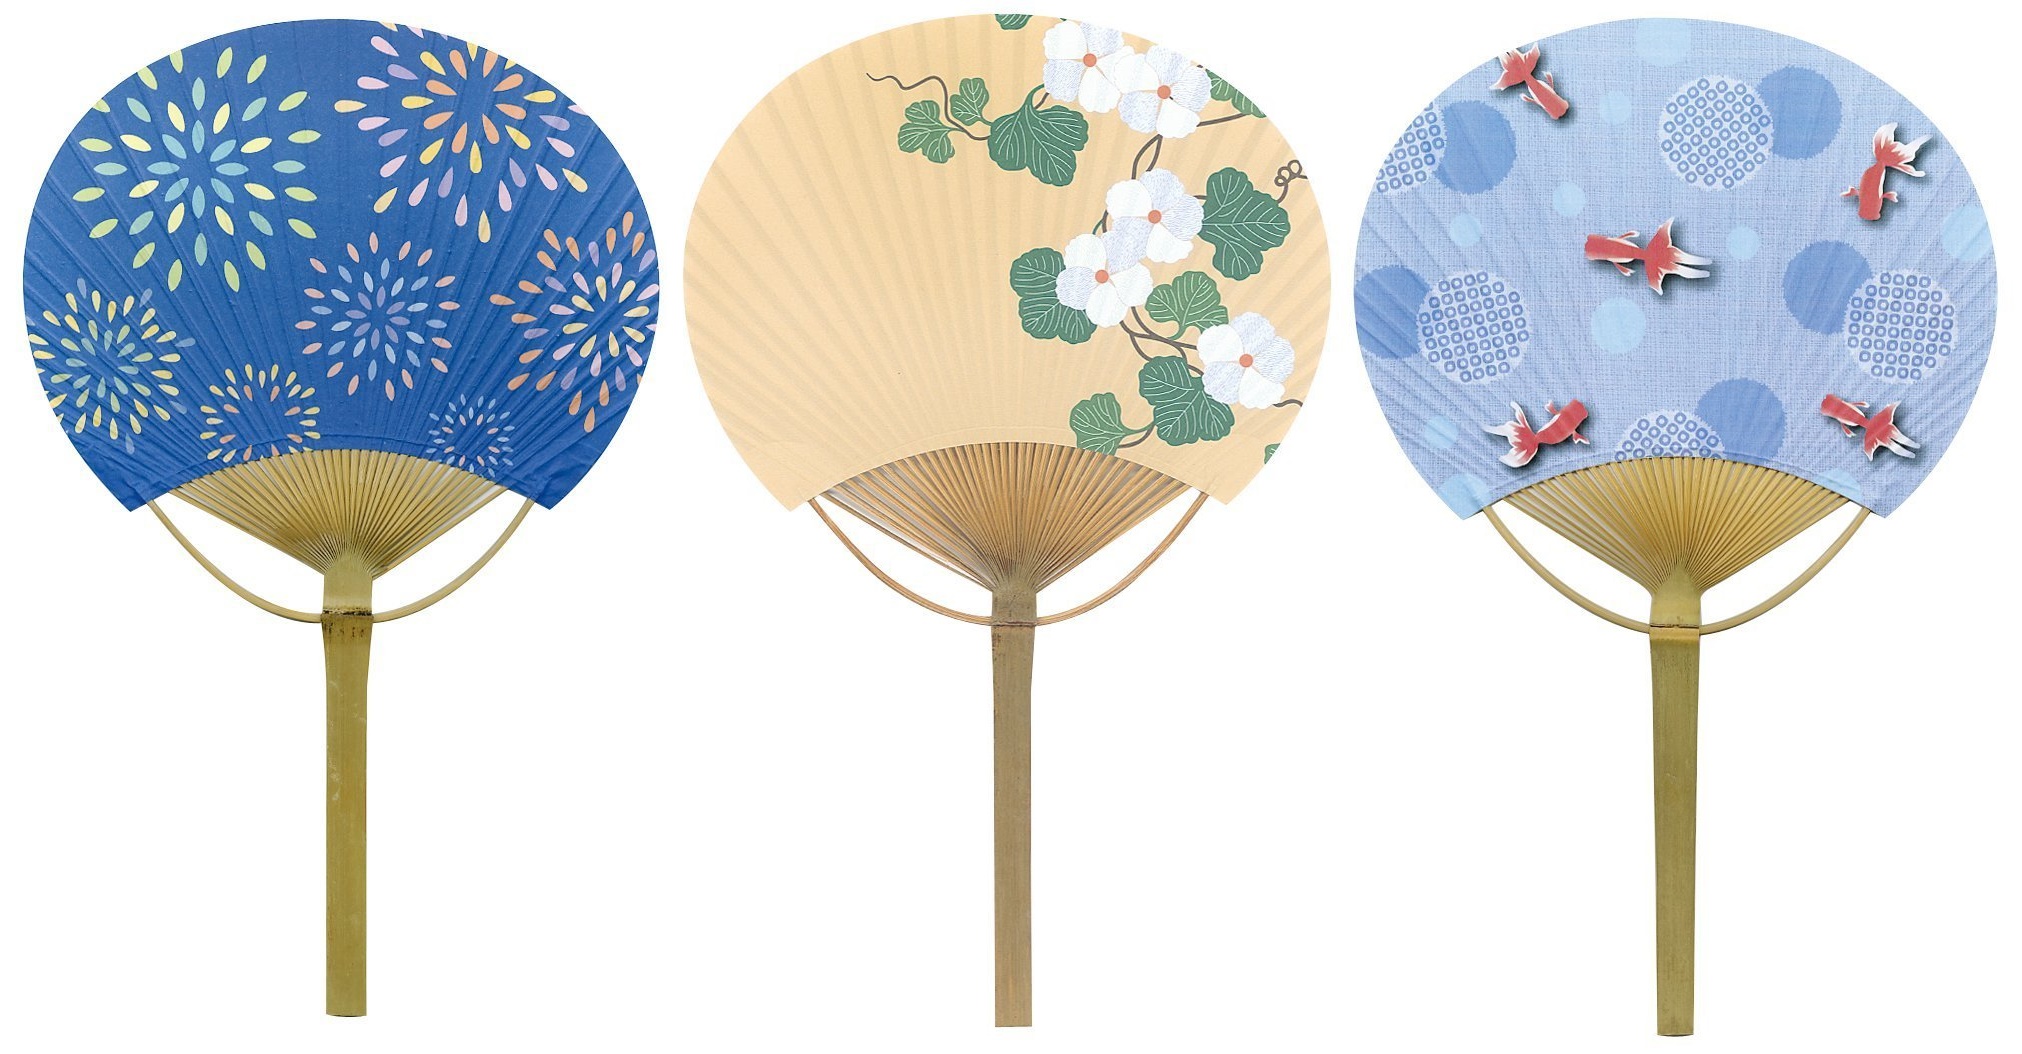 Japanese Uchiwa Paper Hand Fan with Flower